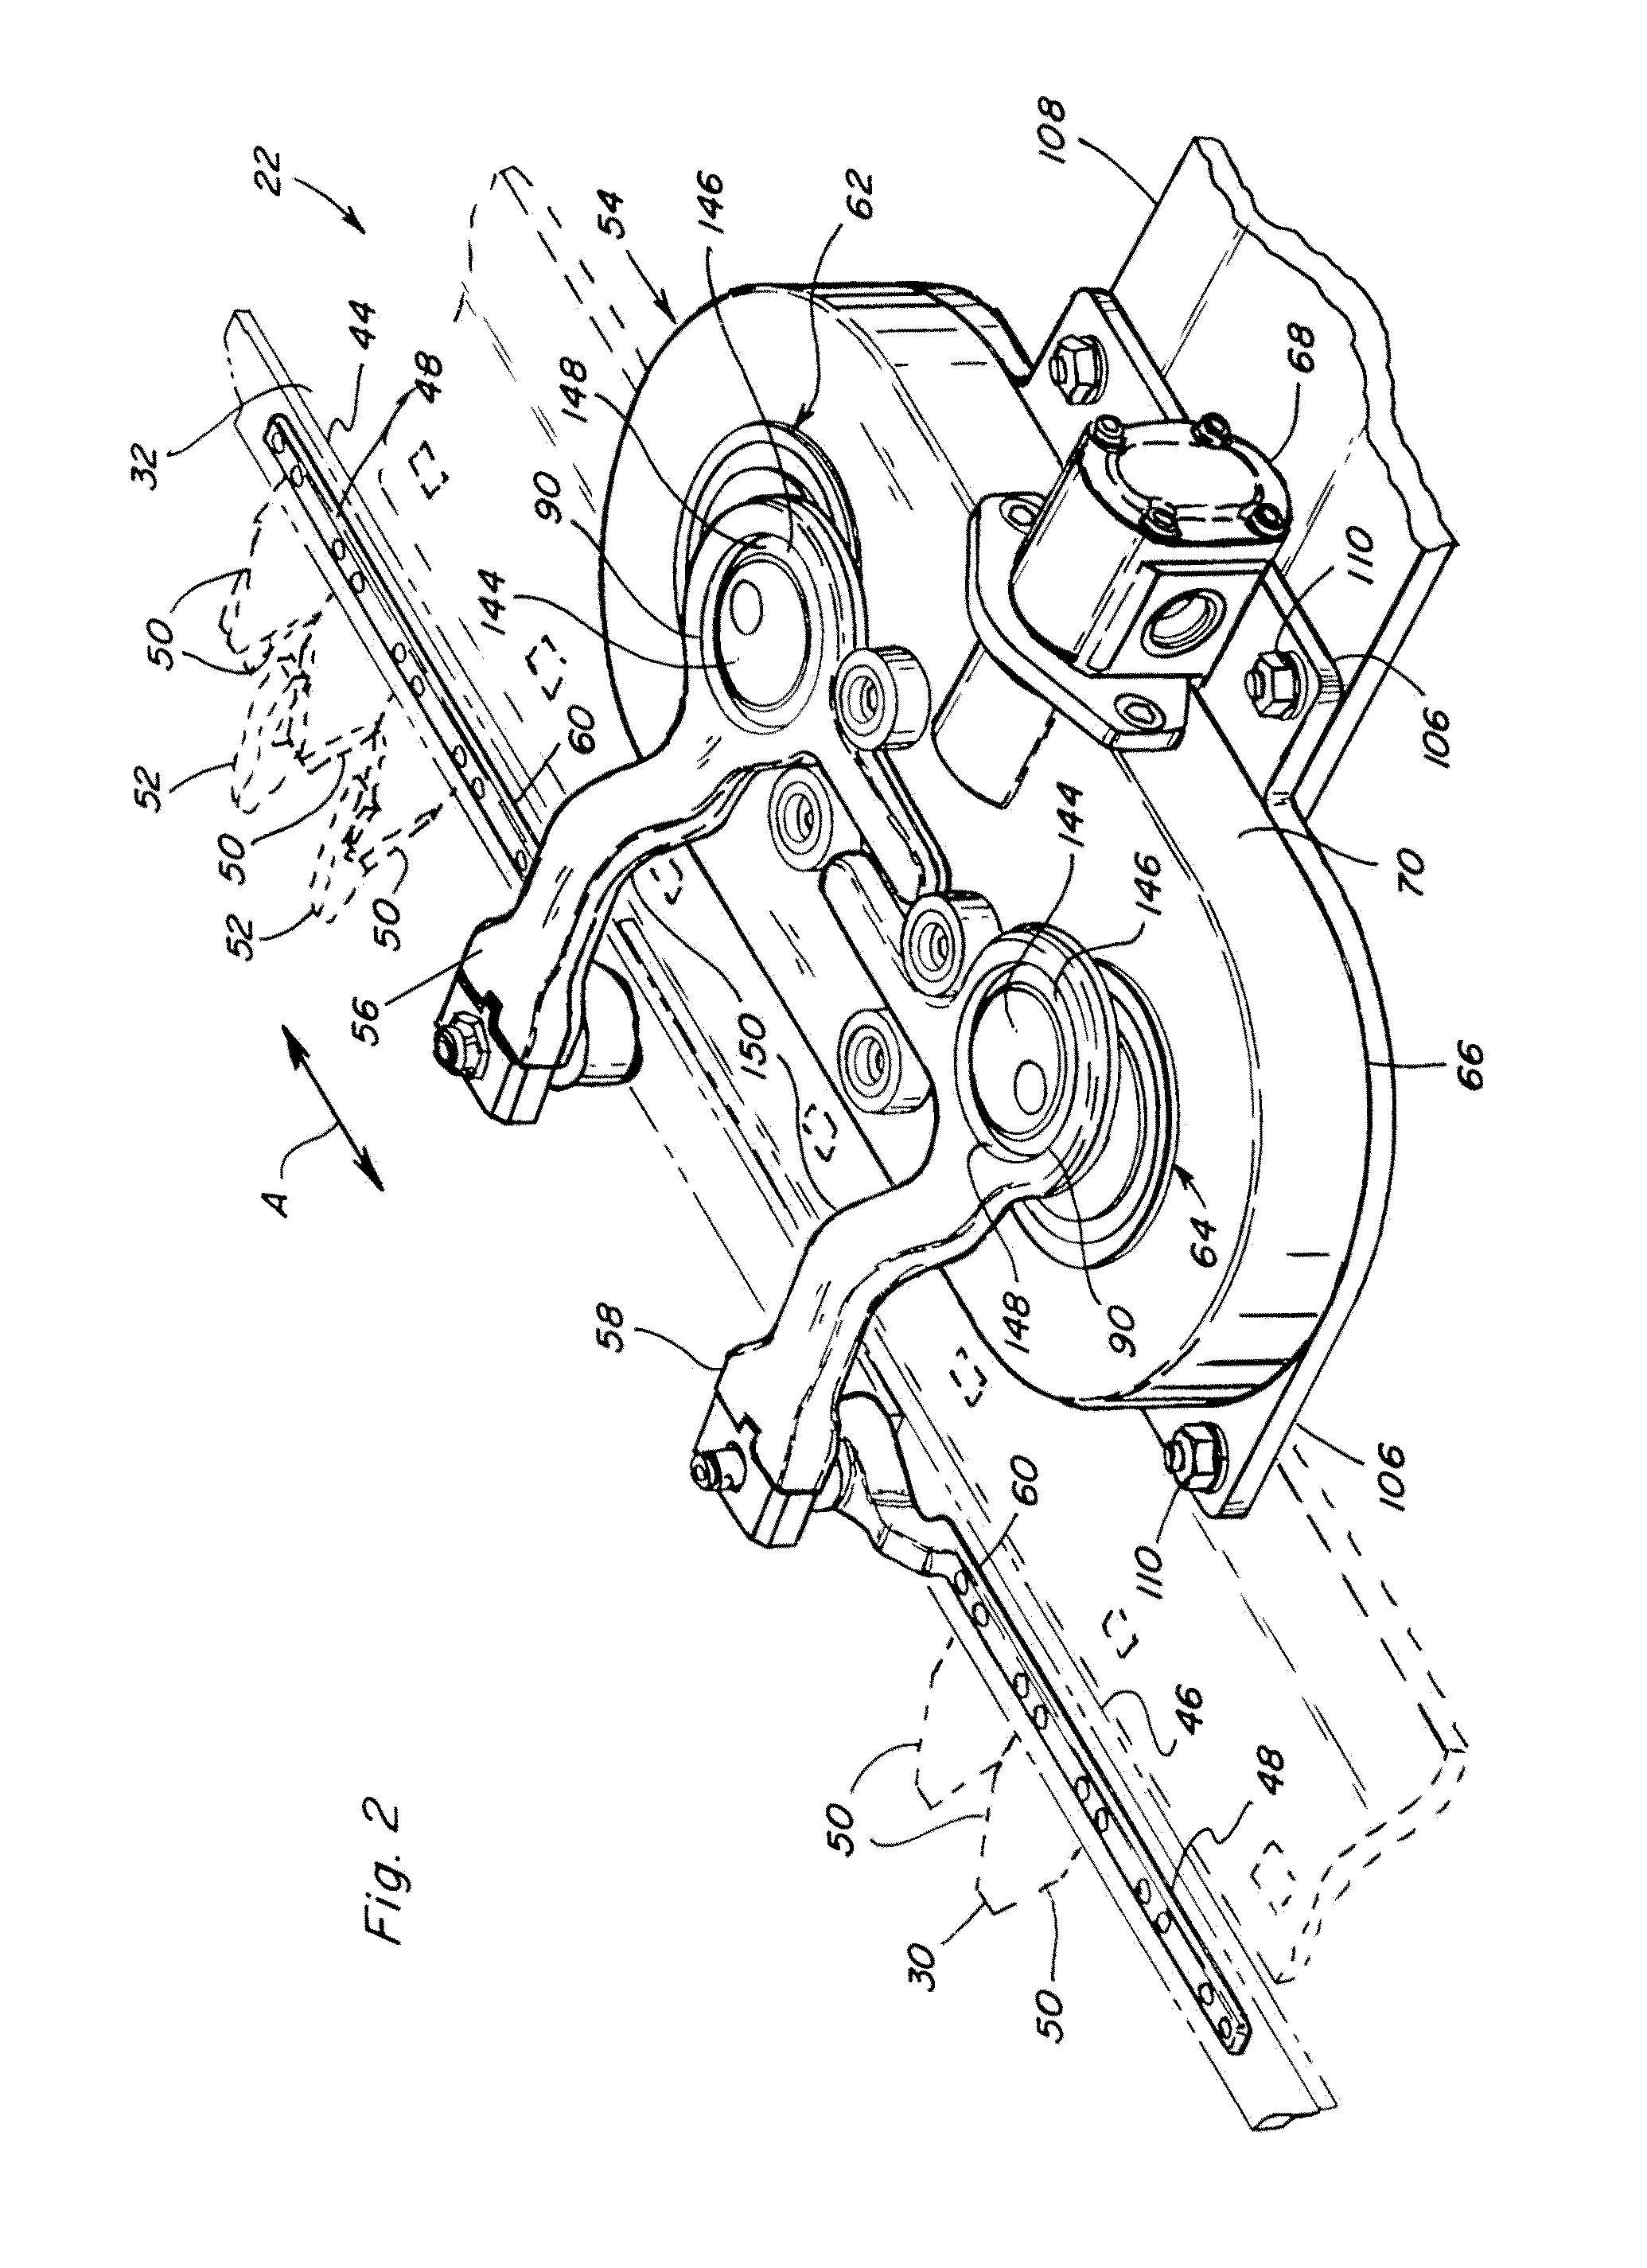 Dual flywheel axially compact epicyclical drive